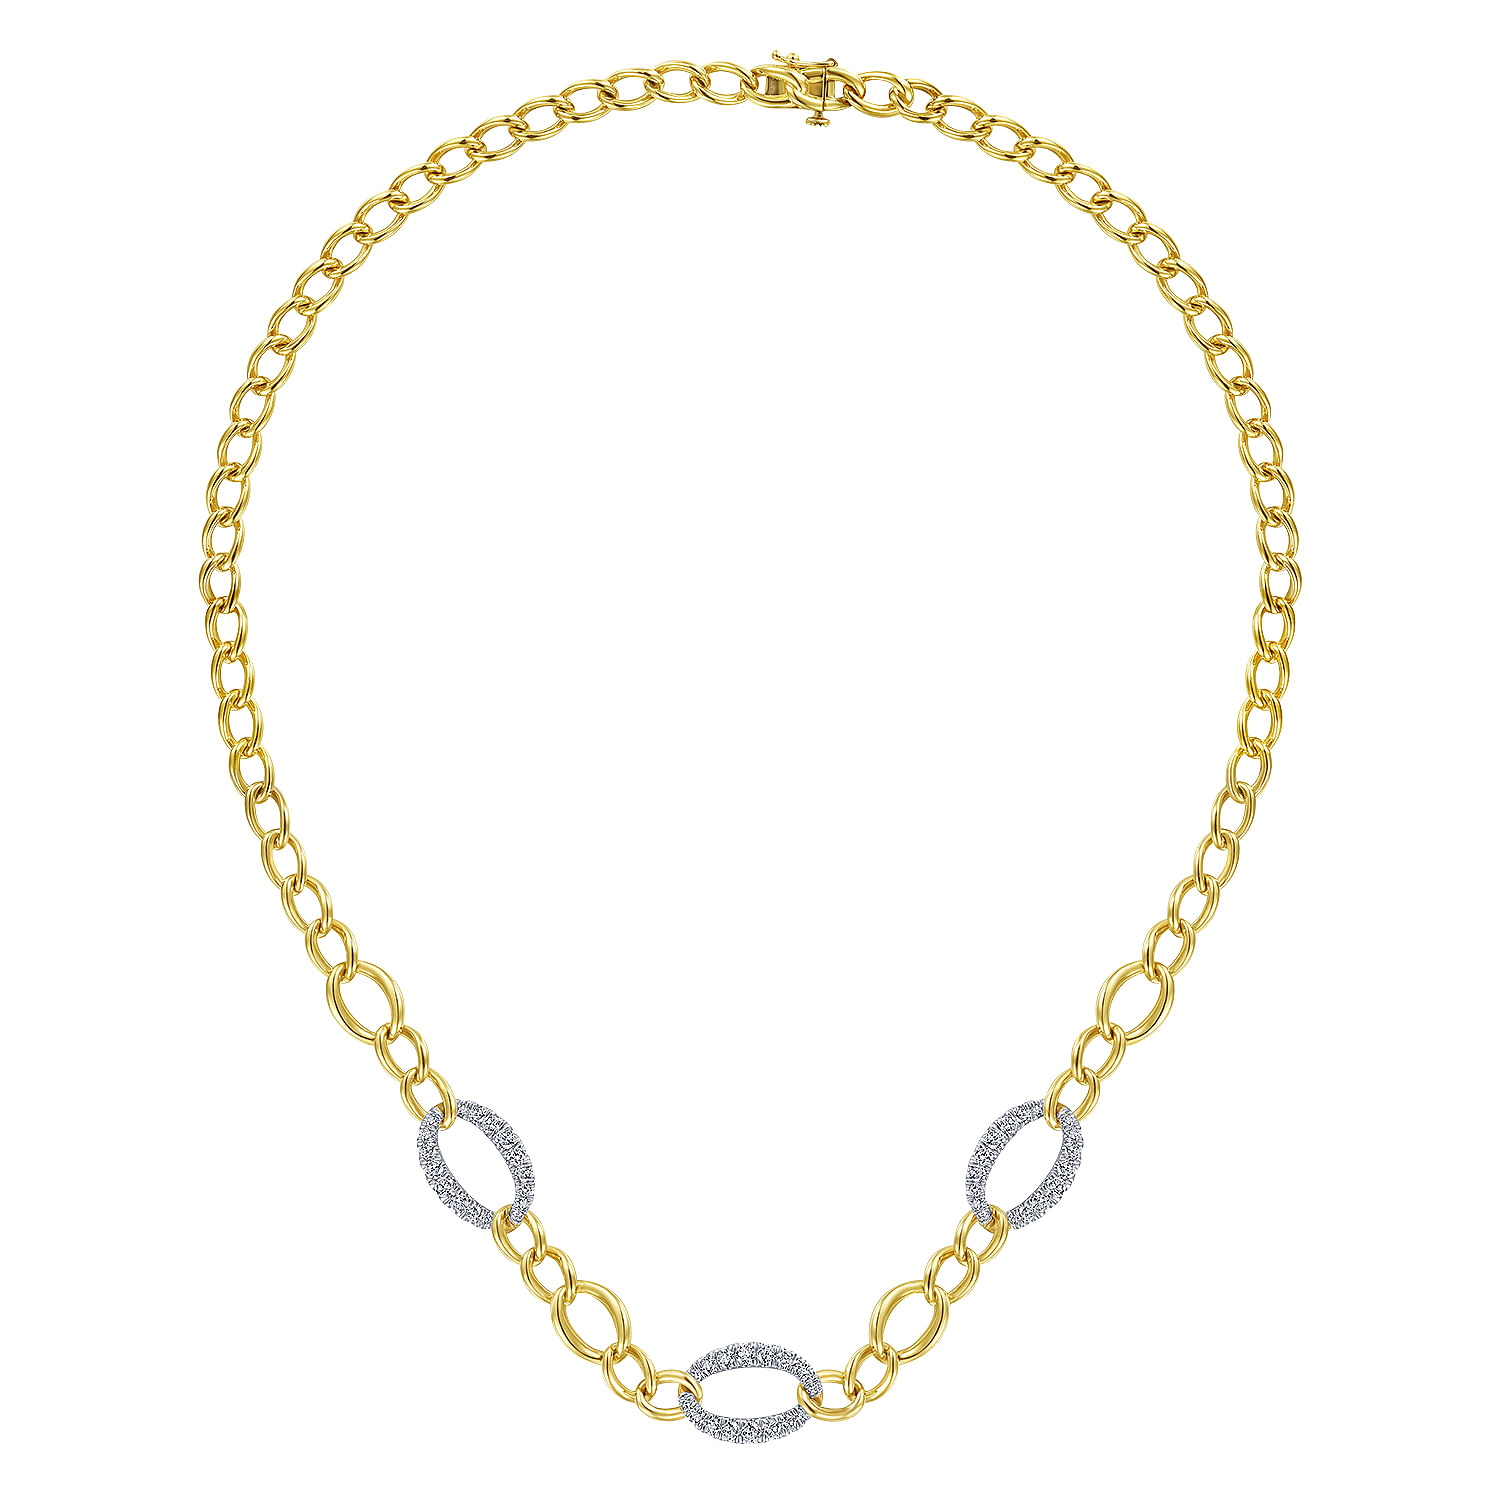 14K Yellow-White Gold Oval Chain Link Necklace with Diamond Pavé